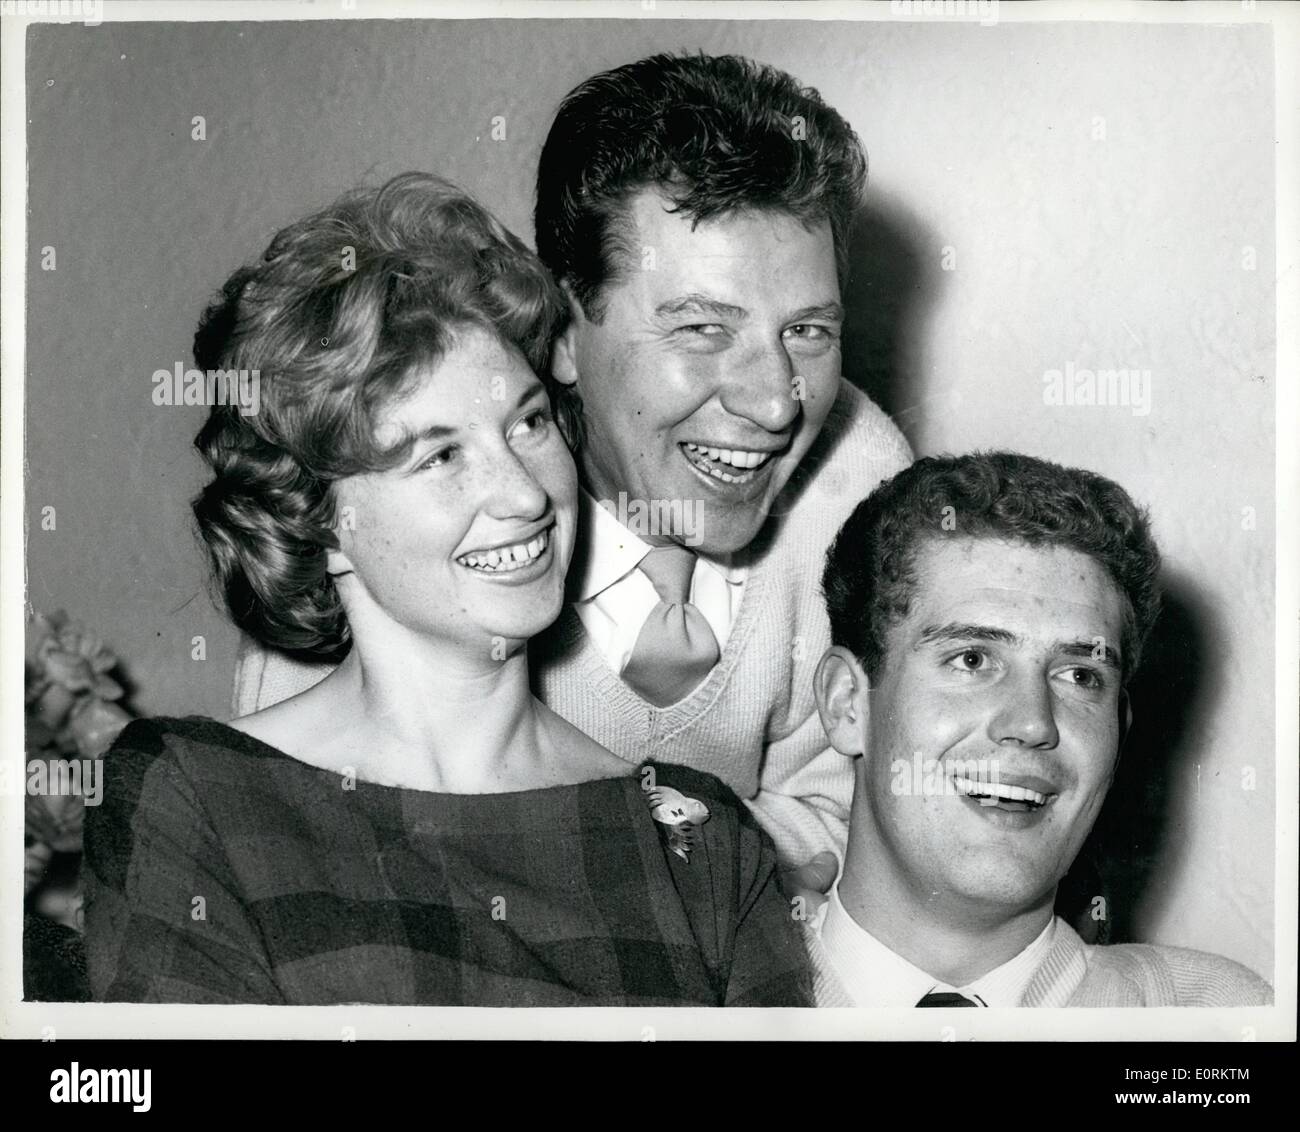 Jan. 01, 1960 - Max Bygraves' sixteen year old daughter gets engaged: Sixteen-year-old Christine Bygraves, eldest daughter of comedian Max Bygraves, and 20-year-old Richard Thomas, announced theri engagement yesterday. Christine, who will be 17 in May, has known Richard, who is training to be an accountant, for about four years. They plan to wed in 1962. Photo shows it's smiles all round from Max, daughter Christine and fiance Richard, after the announcement of the engagement yesterday. Stock Photo